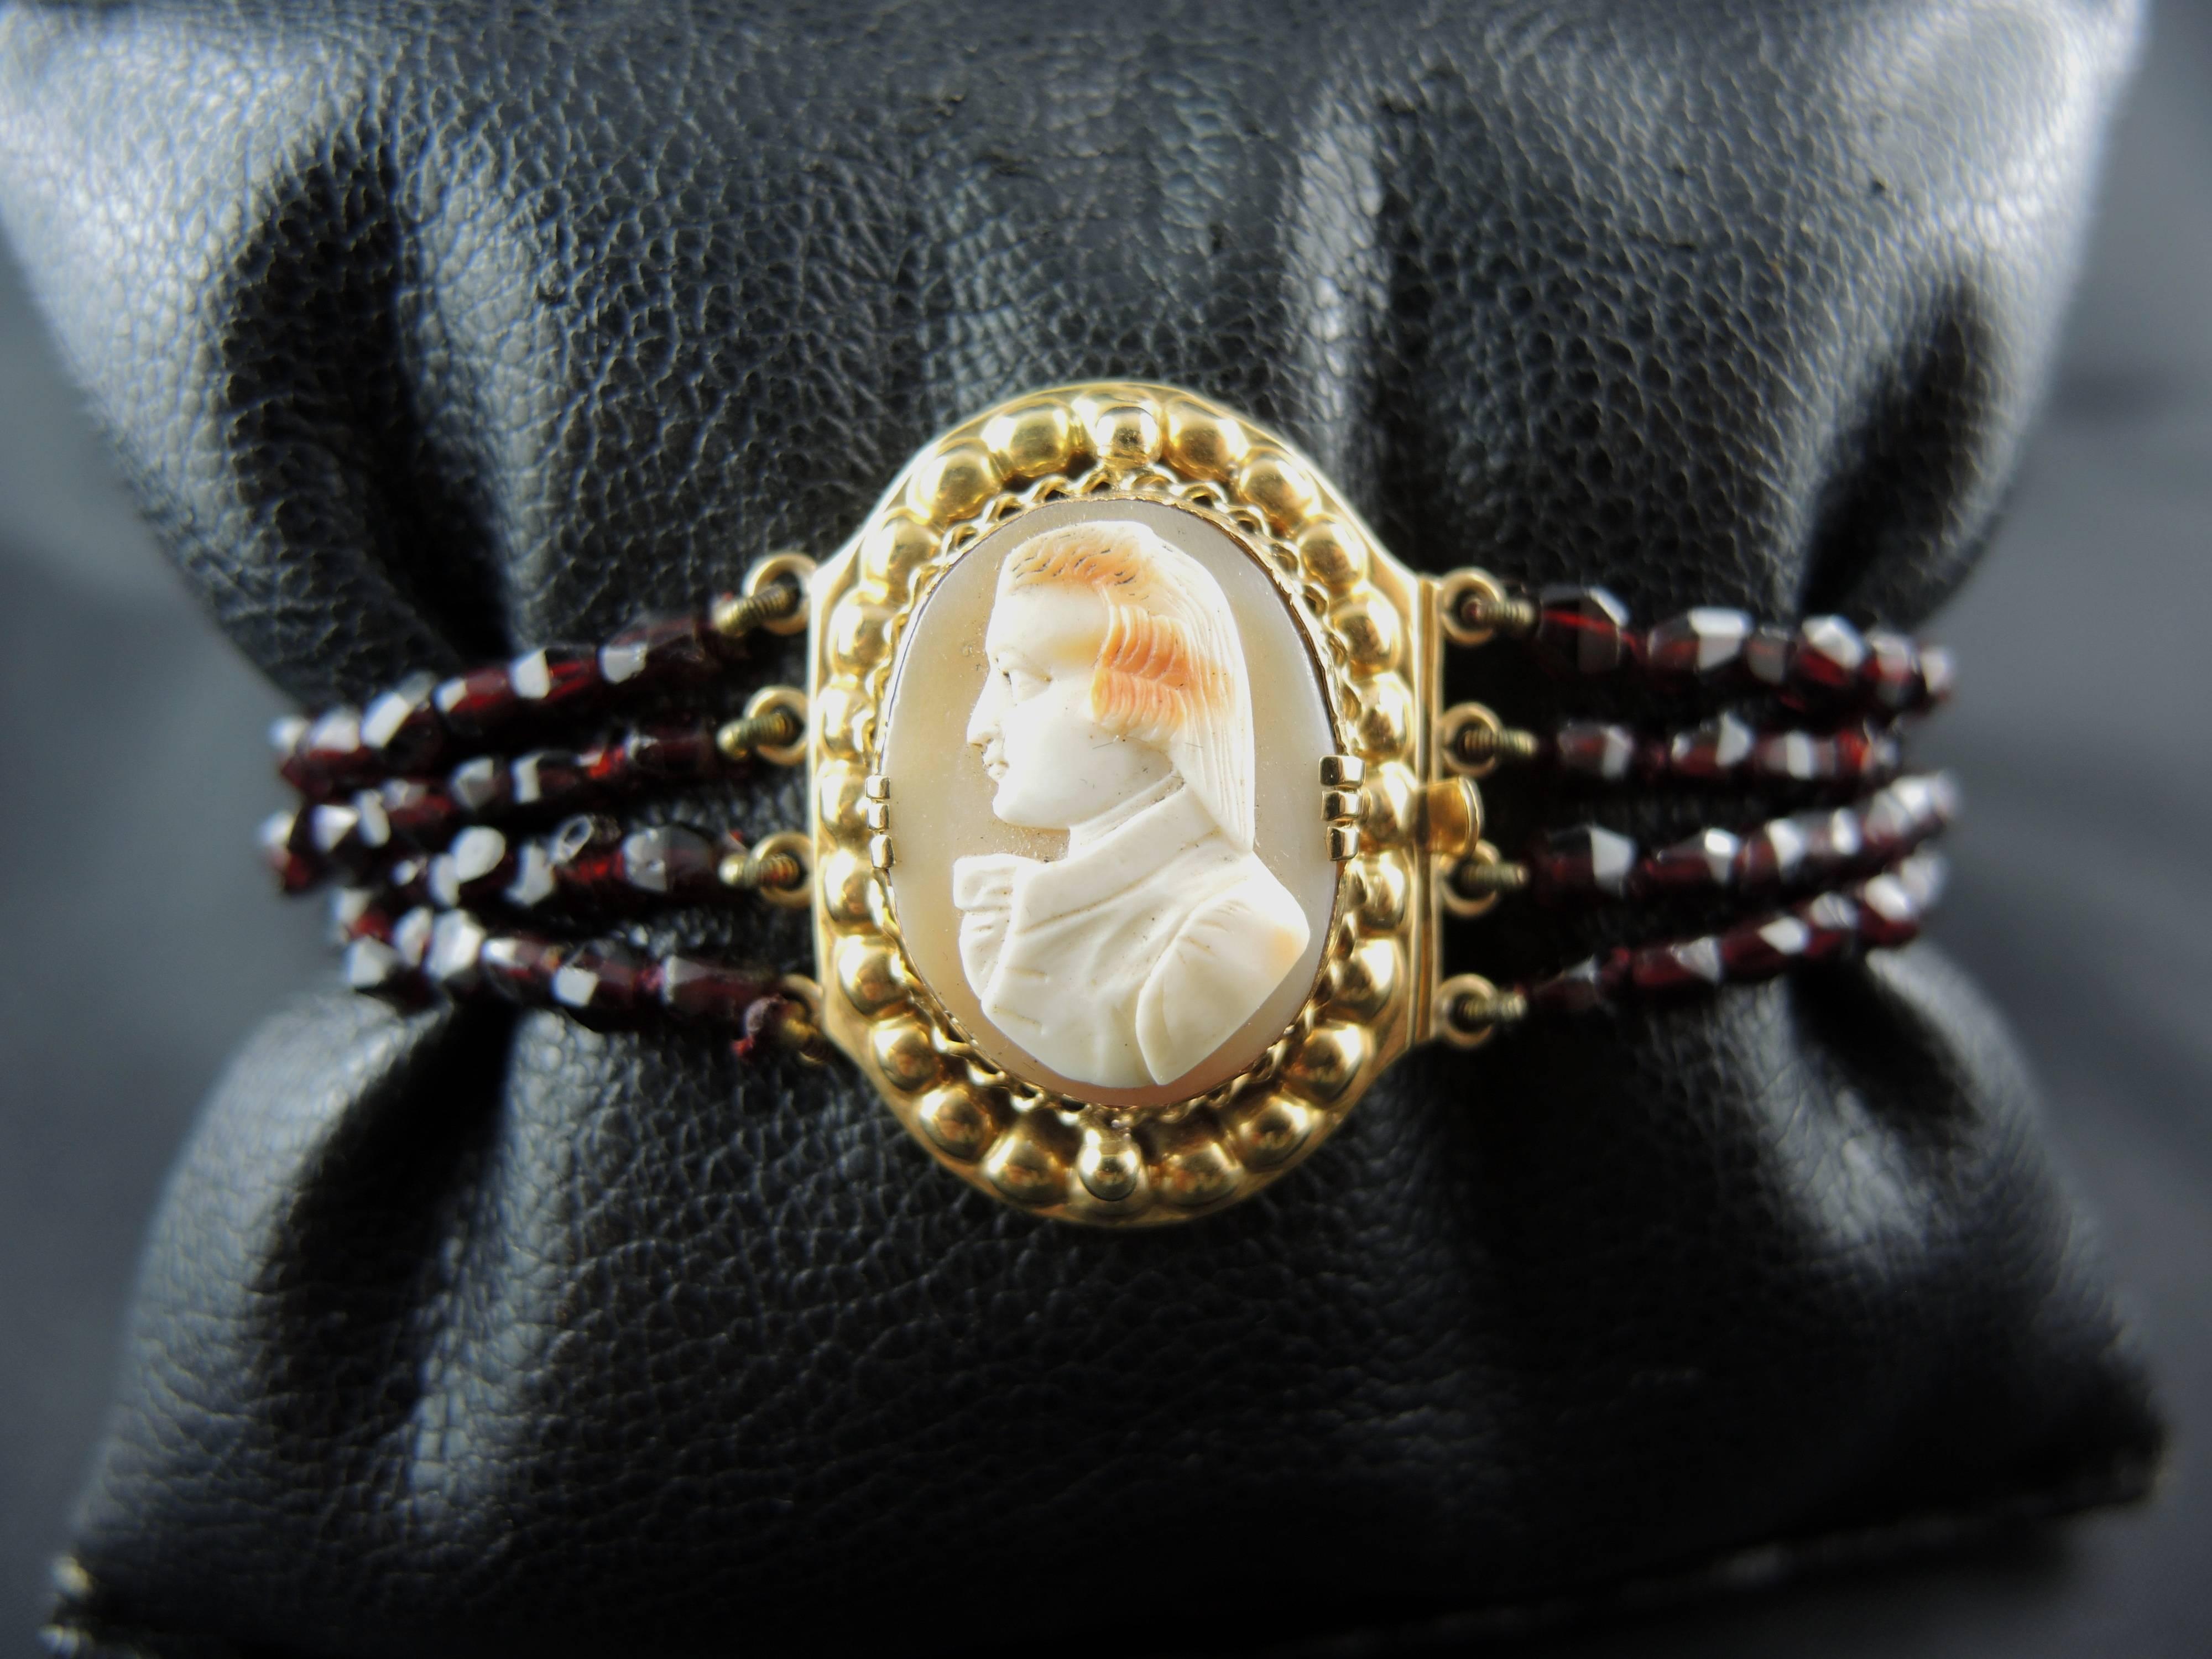 18kt yellow gold bracelet (quality mark: eagle's head) set with four garnets strands, and a shell cameo showing a man.

French work from the 19th Century.

Weight: 35,90 g
Length: 18,00 cm

State : very little scratches on the gold parts, visible on